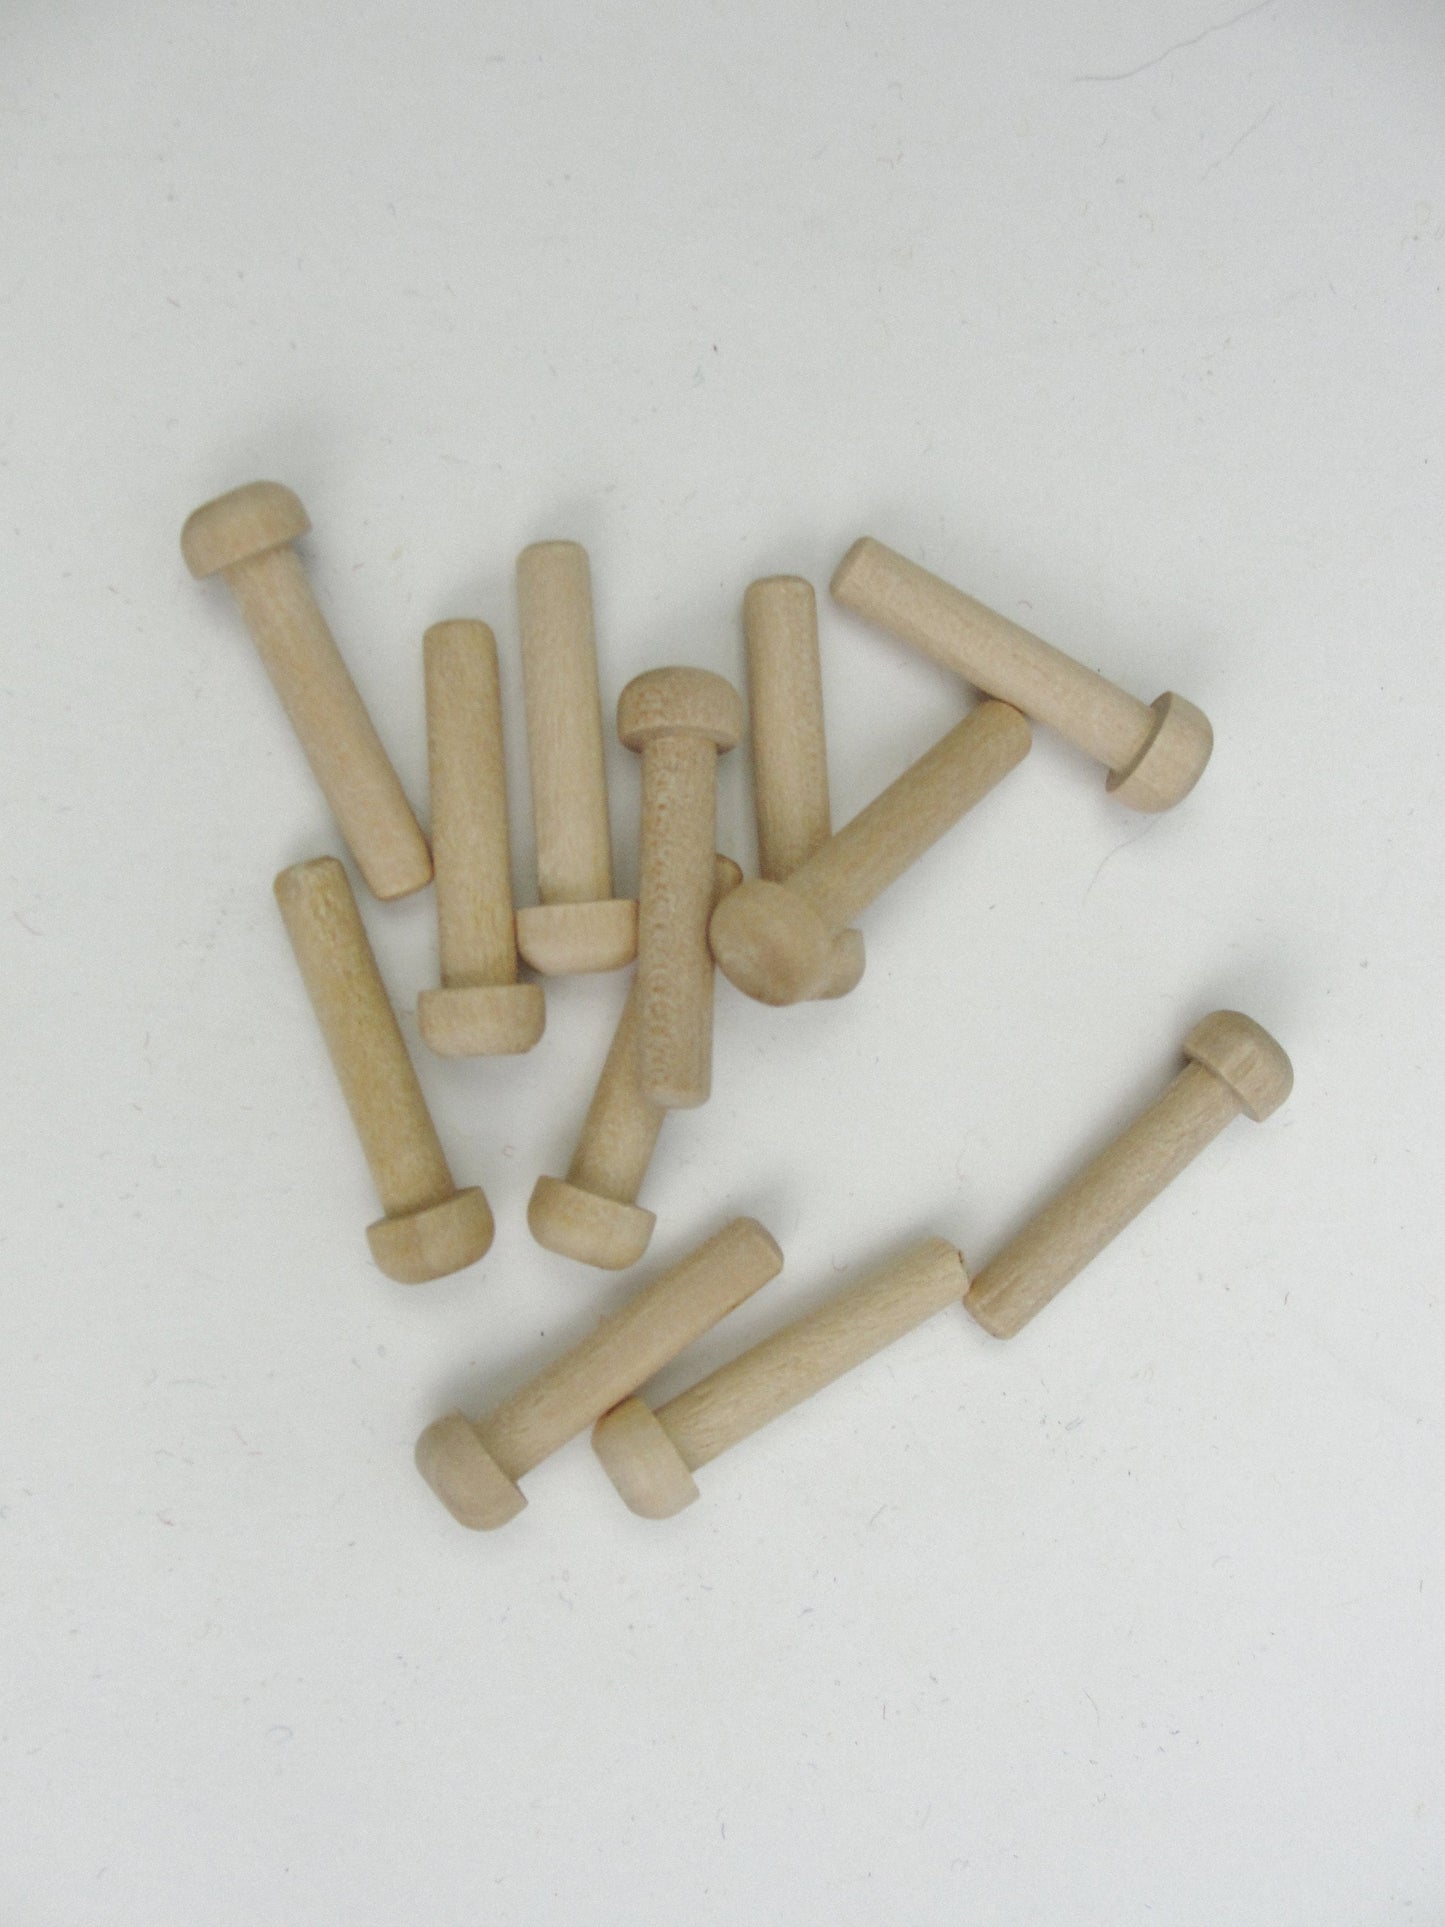 Short wooden peg 1 1/4" toy axle unfinished DIY set of 12